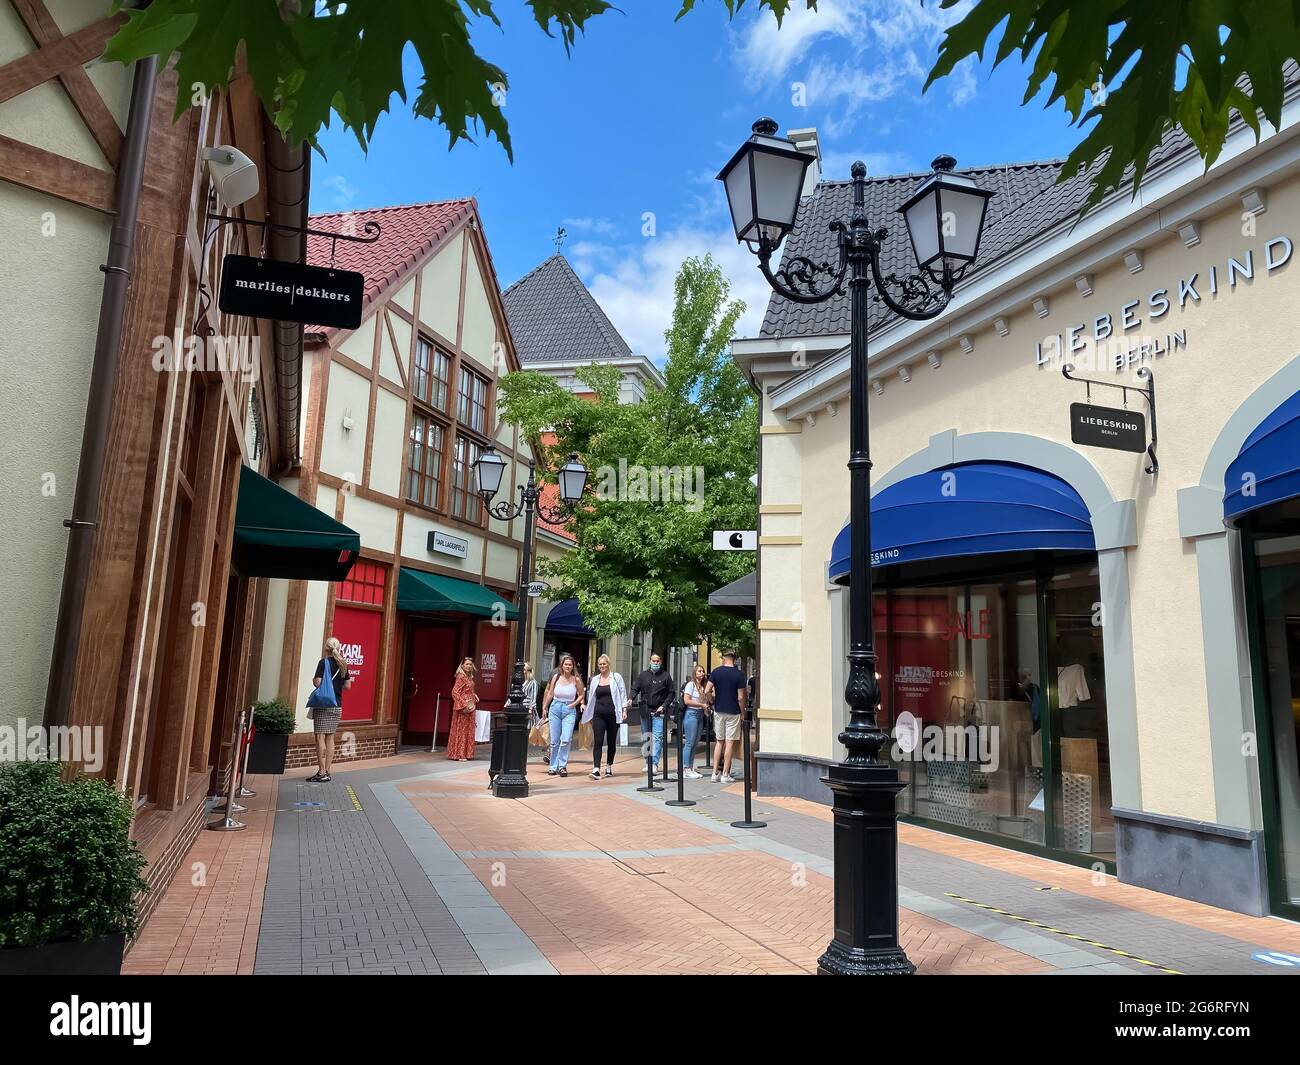 Roermond (designer outlet), Netherlands - July 1. 2021: View on exterior  shopping street with stores and people walking Stock Photo - Alamy